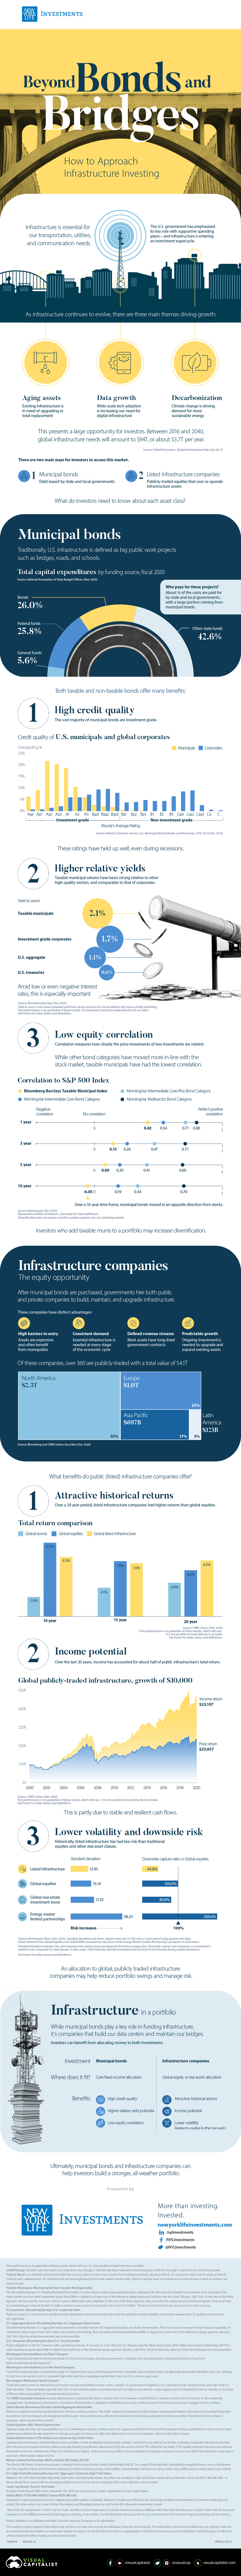 Infrastructure Investments